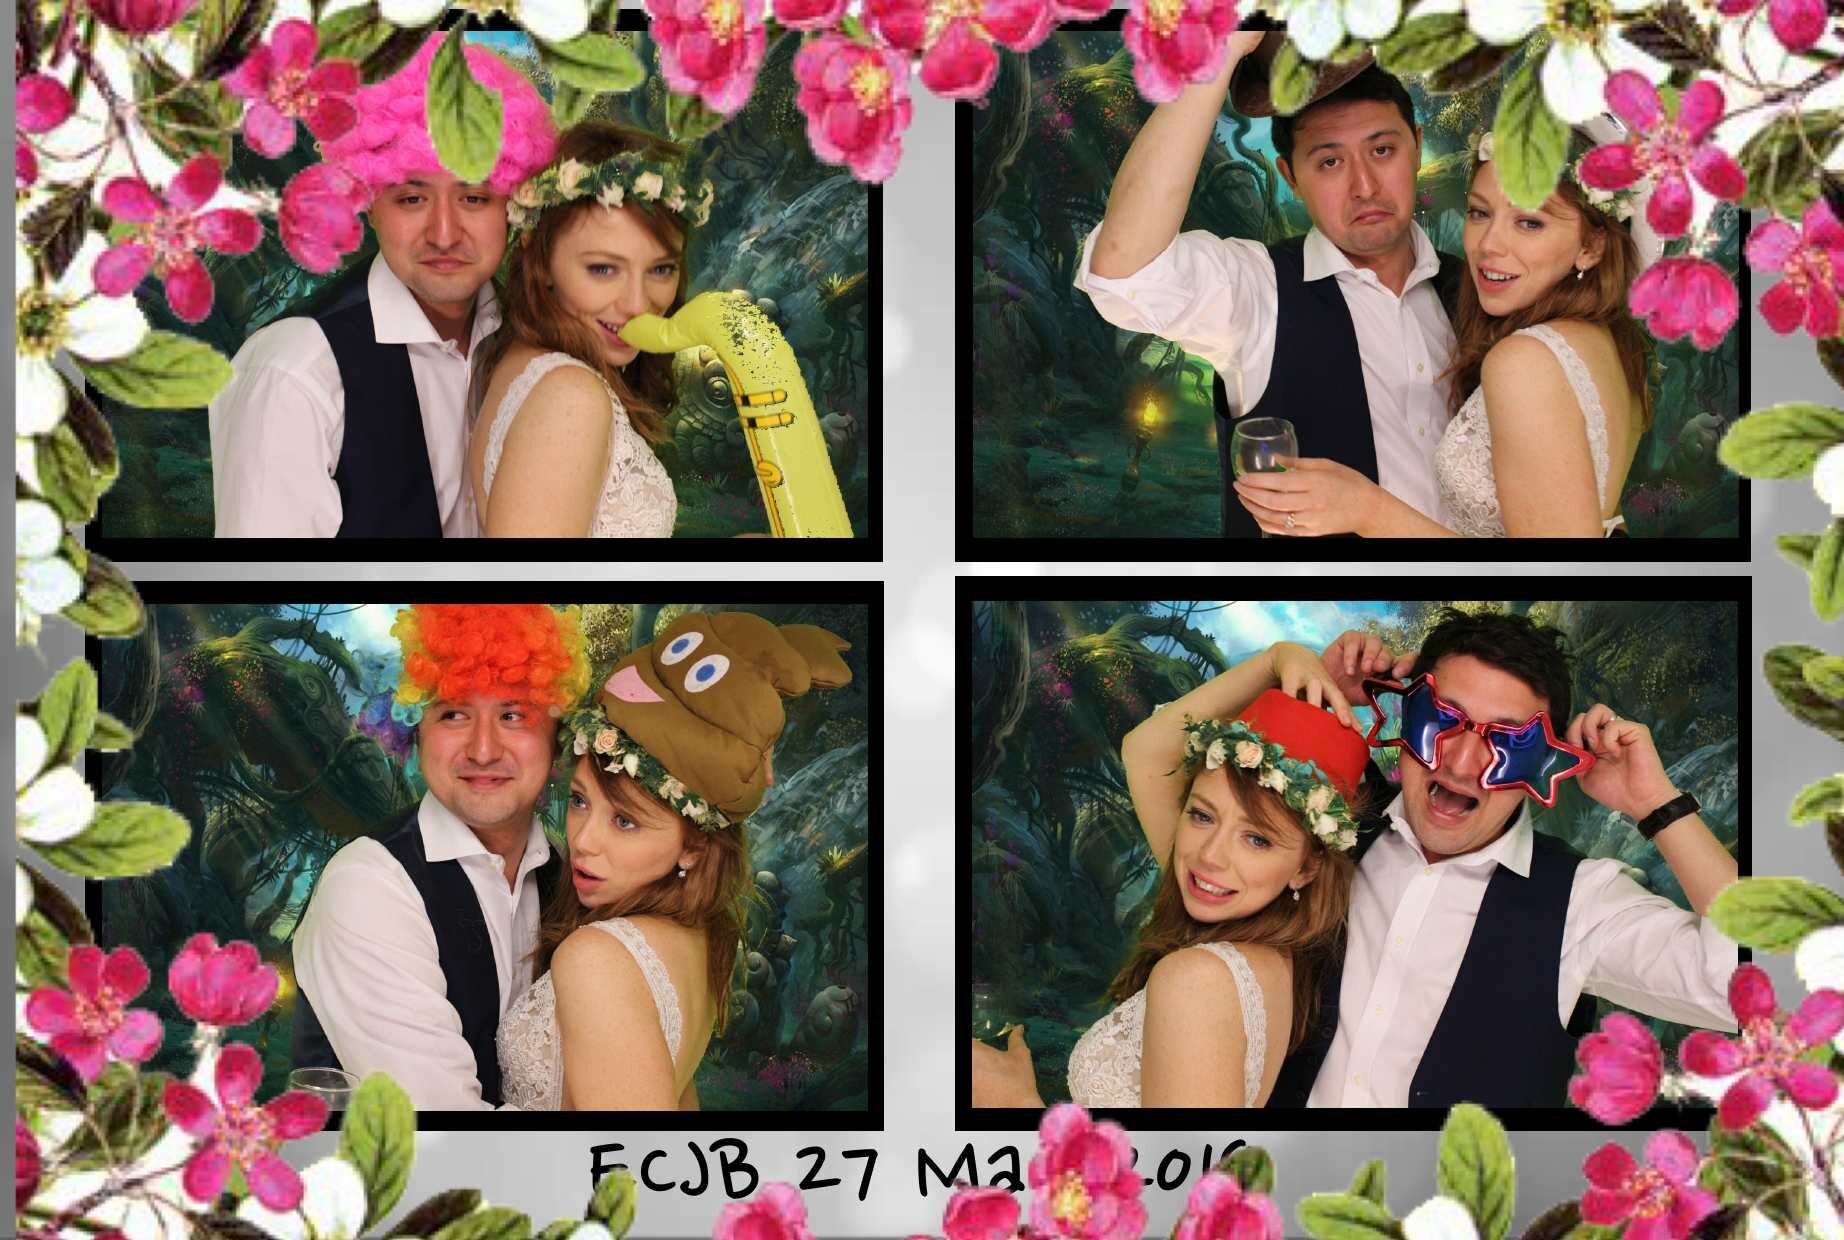 Bridge and groom in photo booth